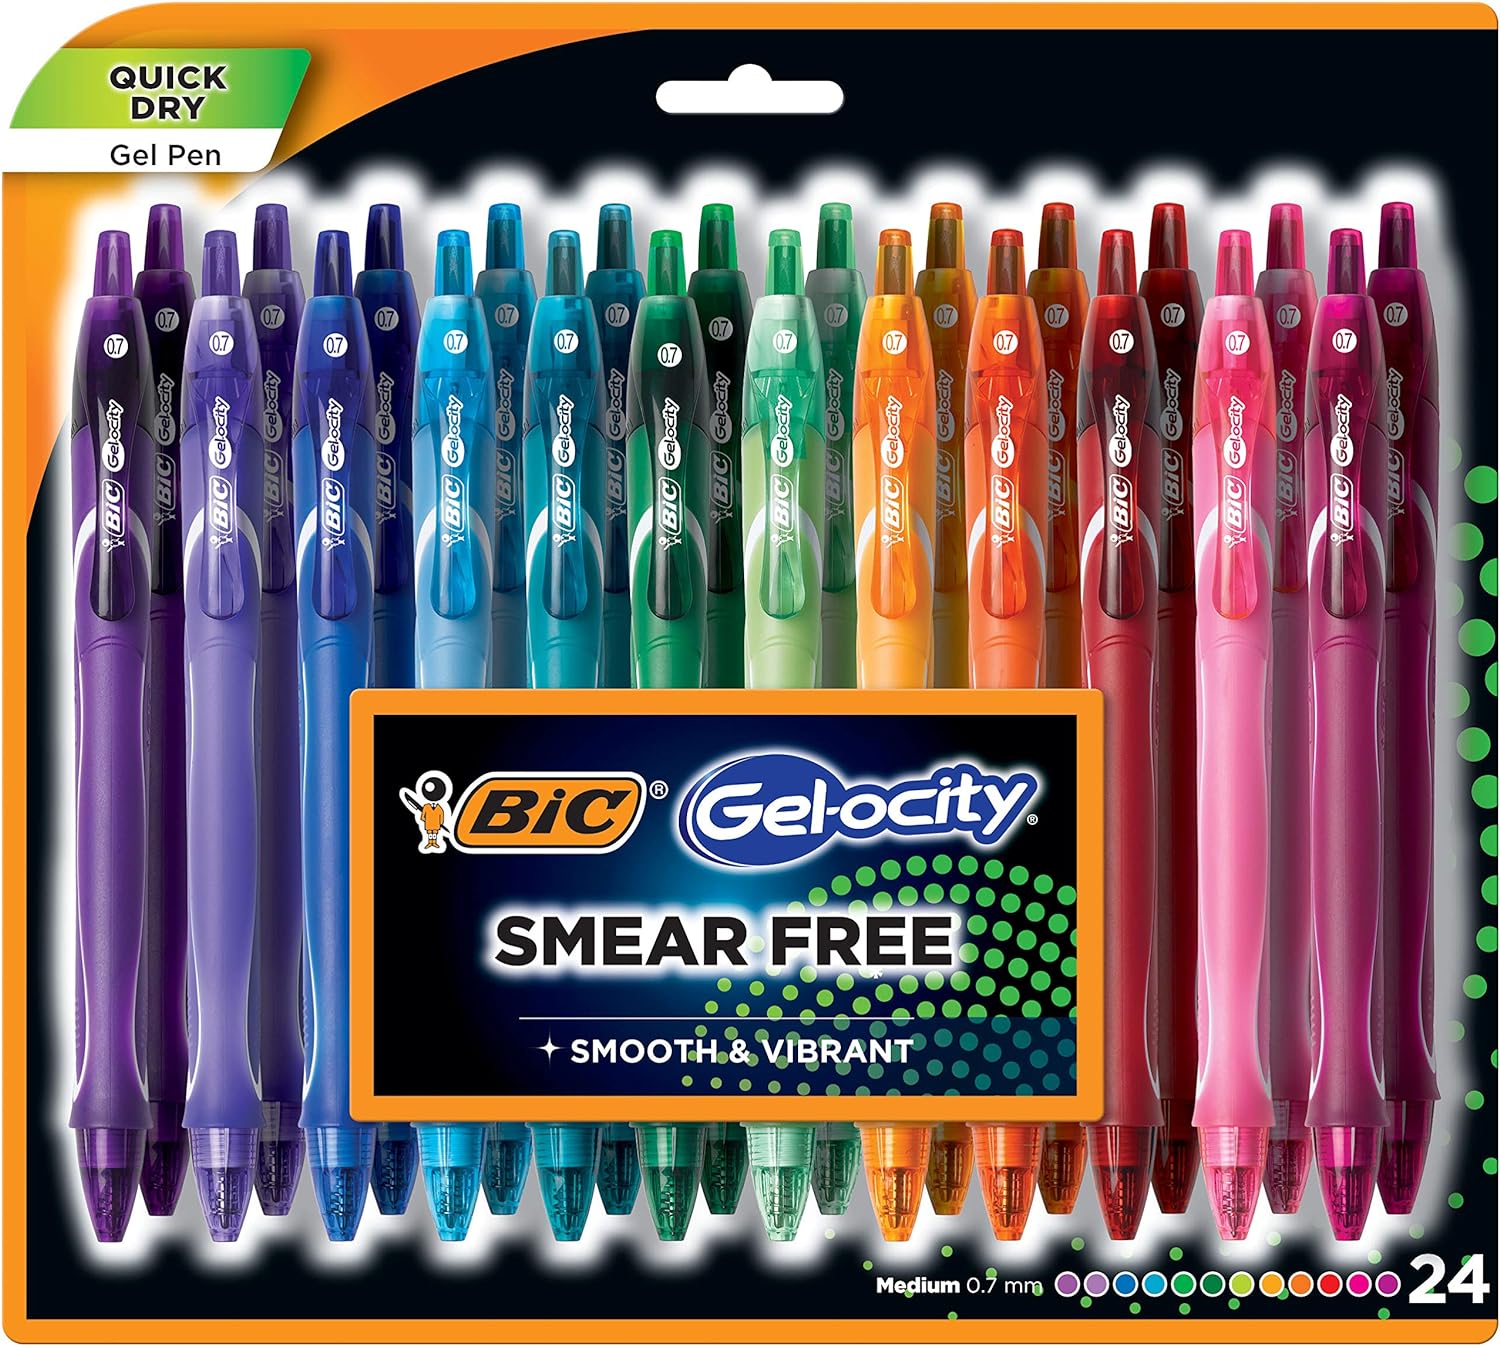 These are great gel pens. The are comfortable to hold and the flow is very smooth! The colors are a bit dark but really beautiful,